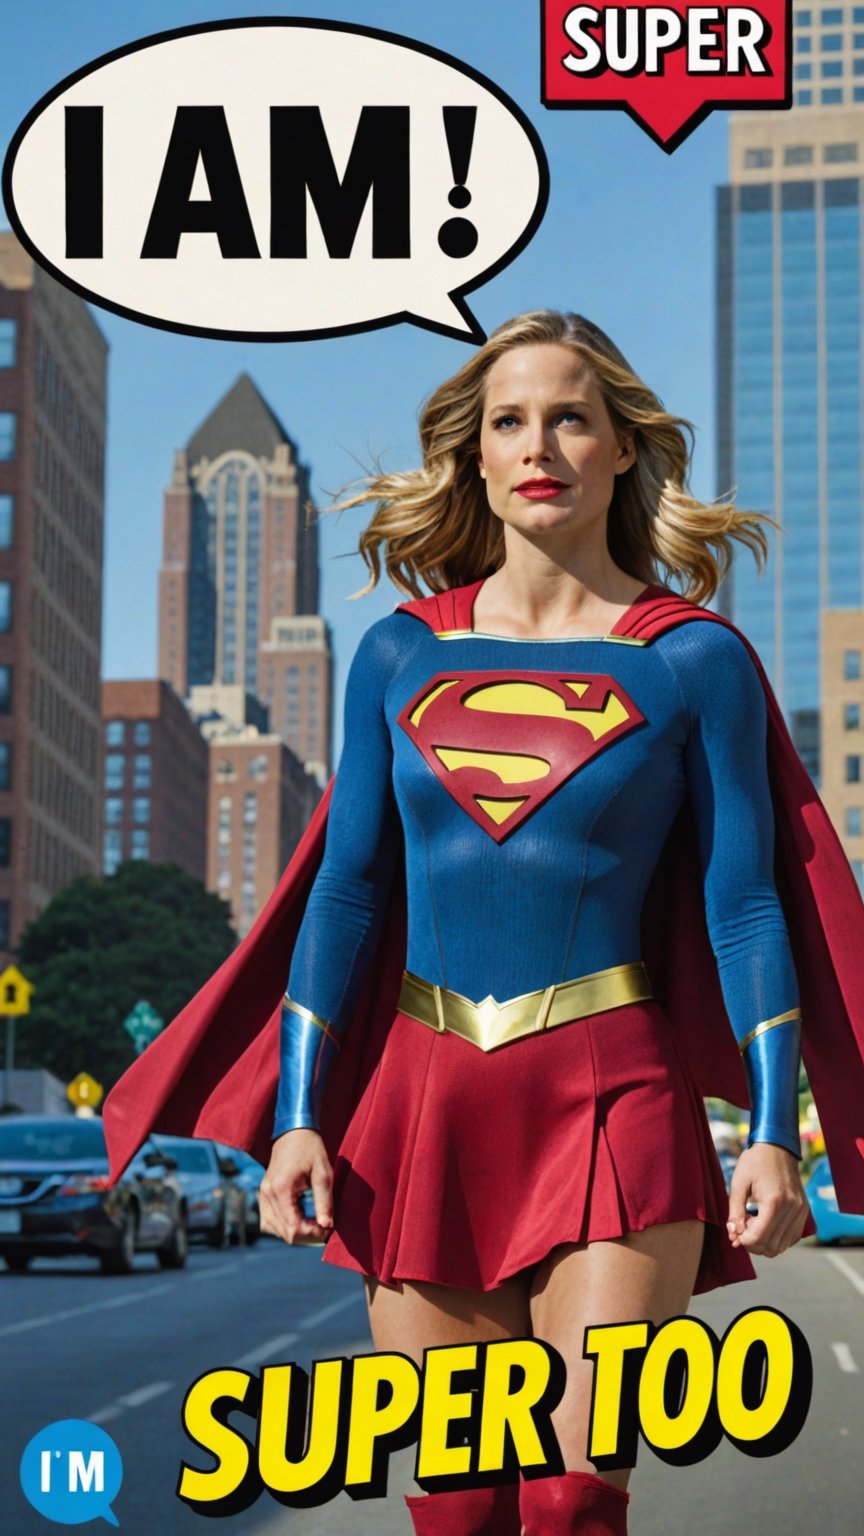 Photo of Supergirl in city with text bubble that says "I am super too"